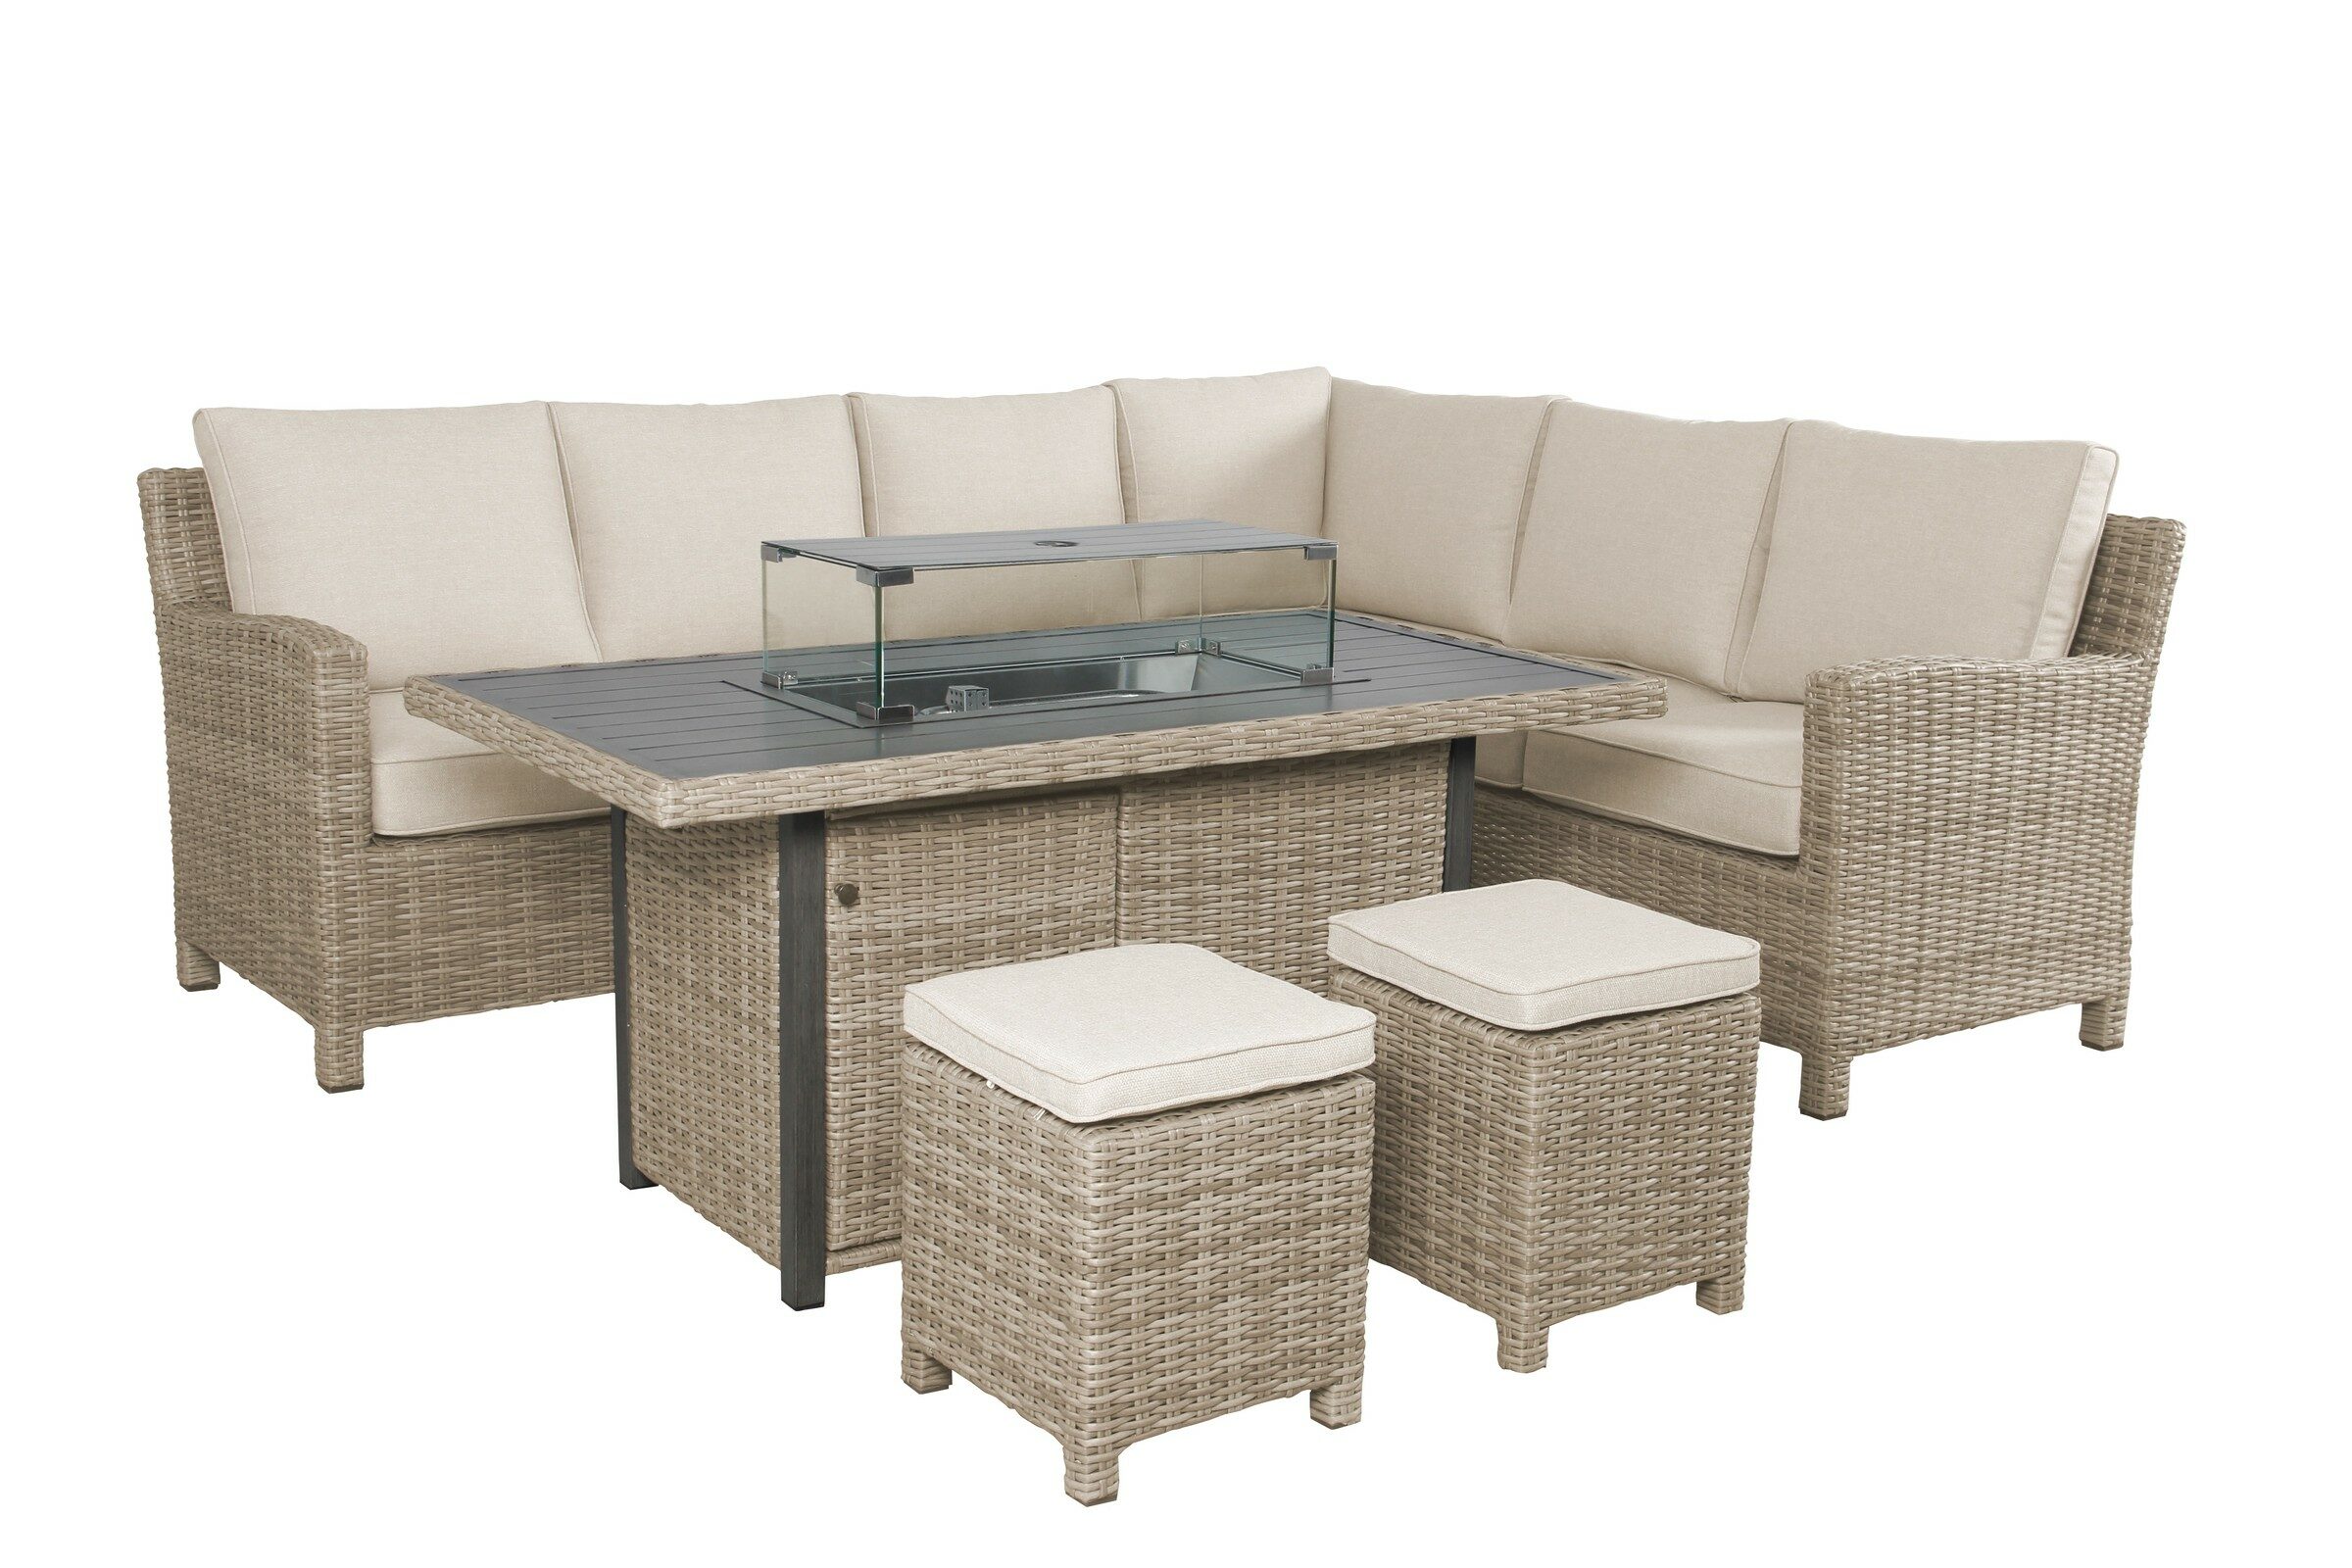 Palma Lh Corner With Firepit Table Oyster